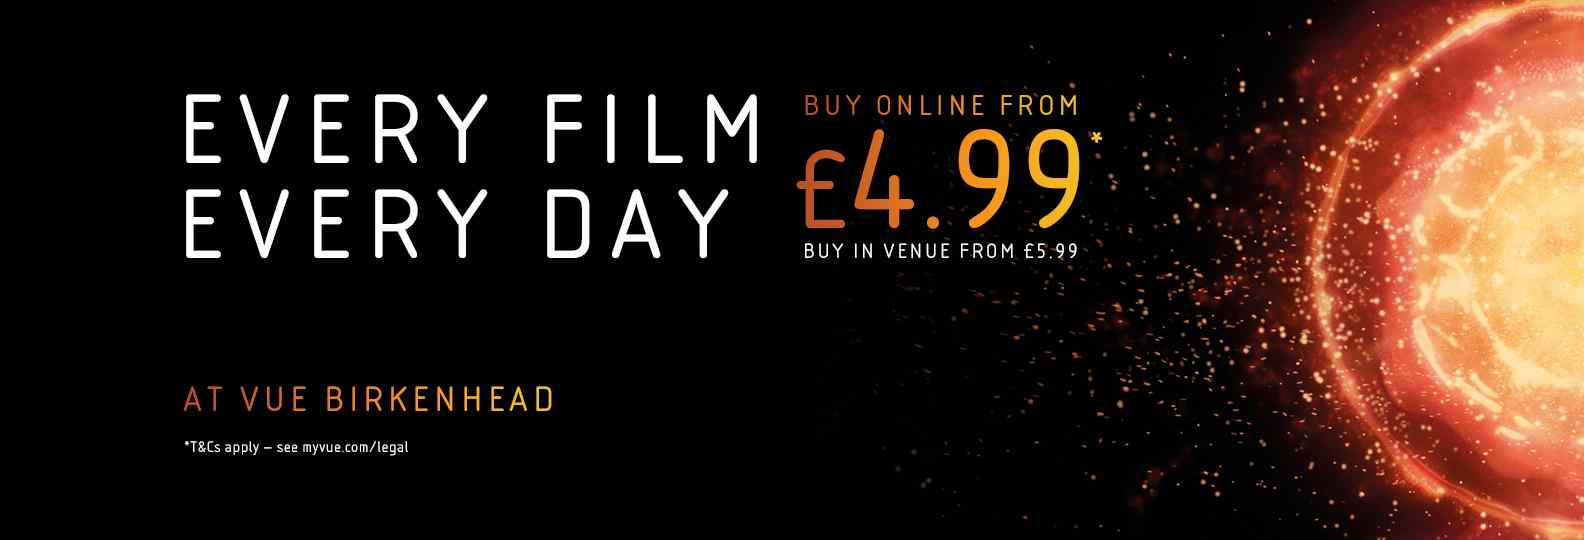 Vue Birkenhead | Every Film, Every Day from £4.99